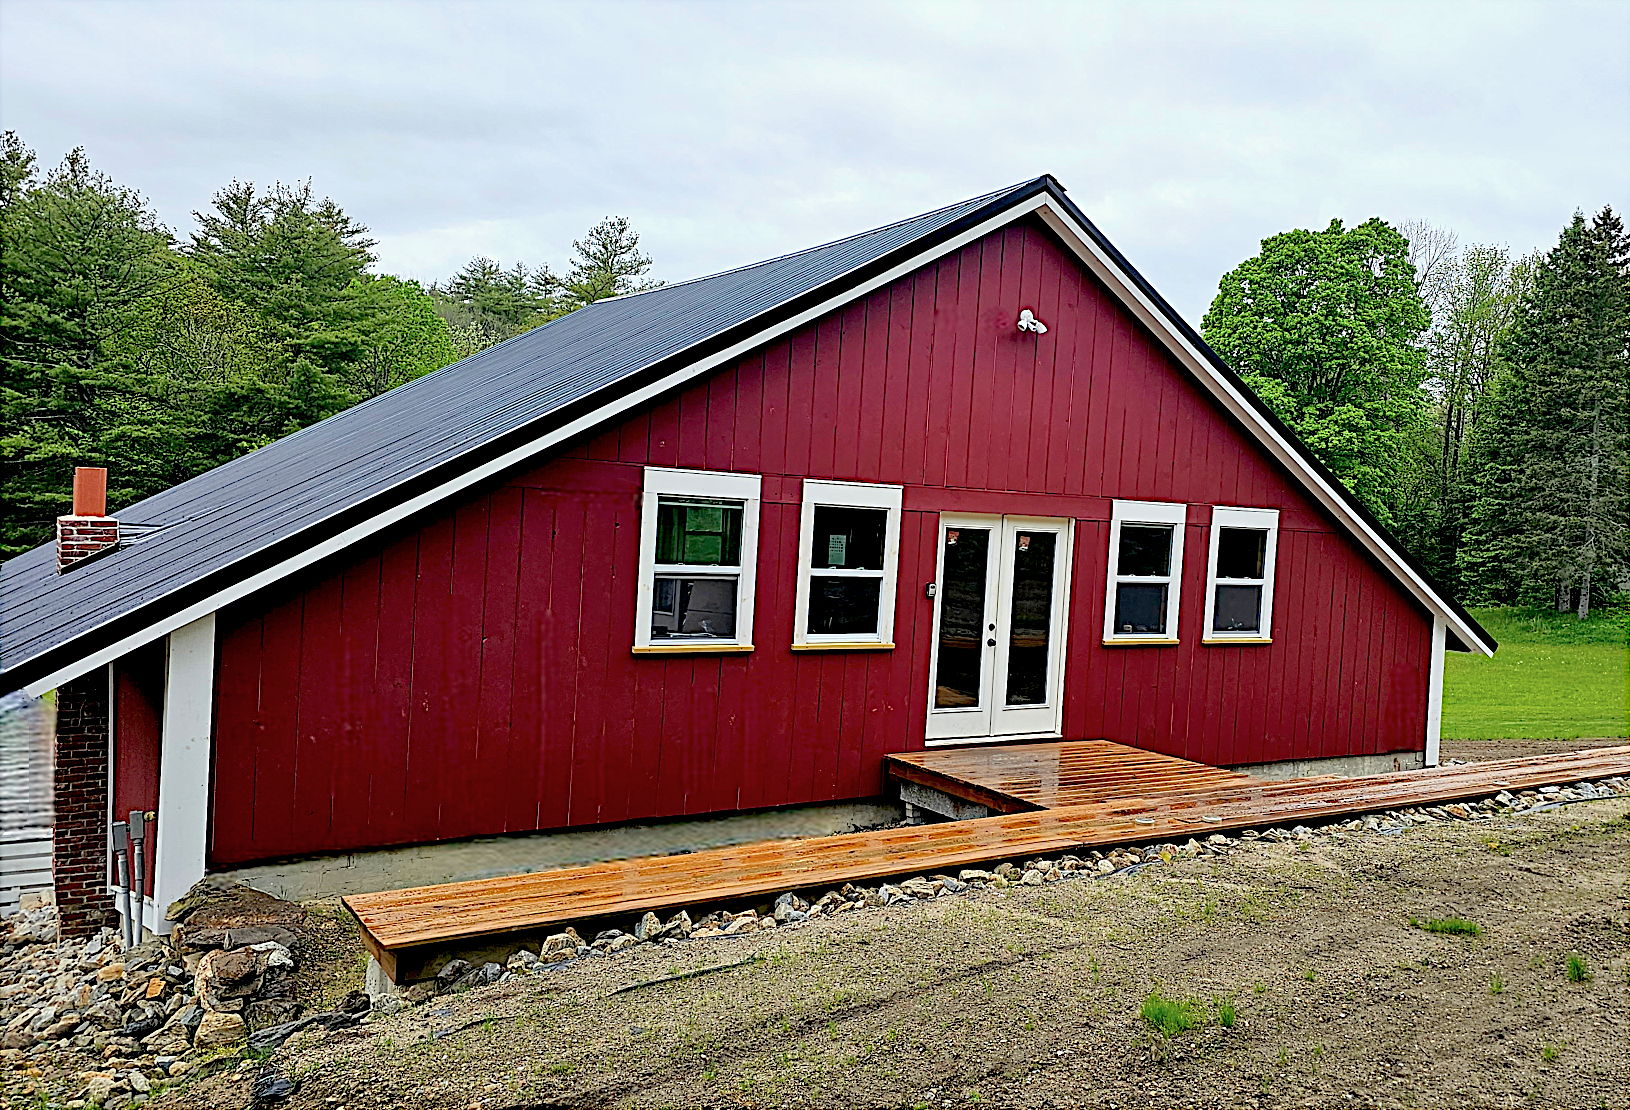 2nd story of barn offers direct walkout to yard for easy access and loading/unloading.